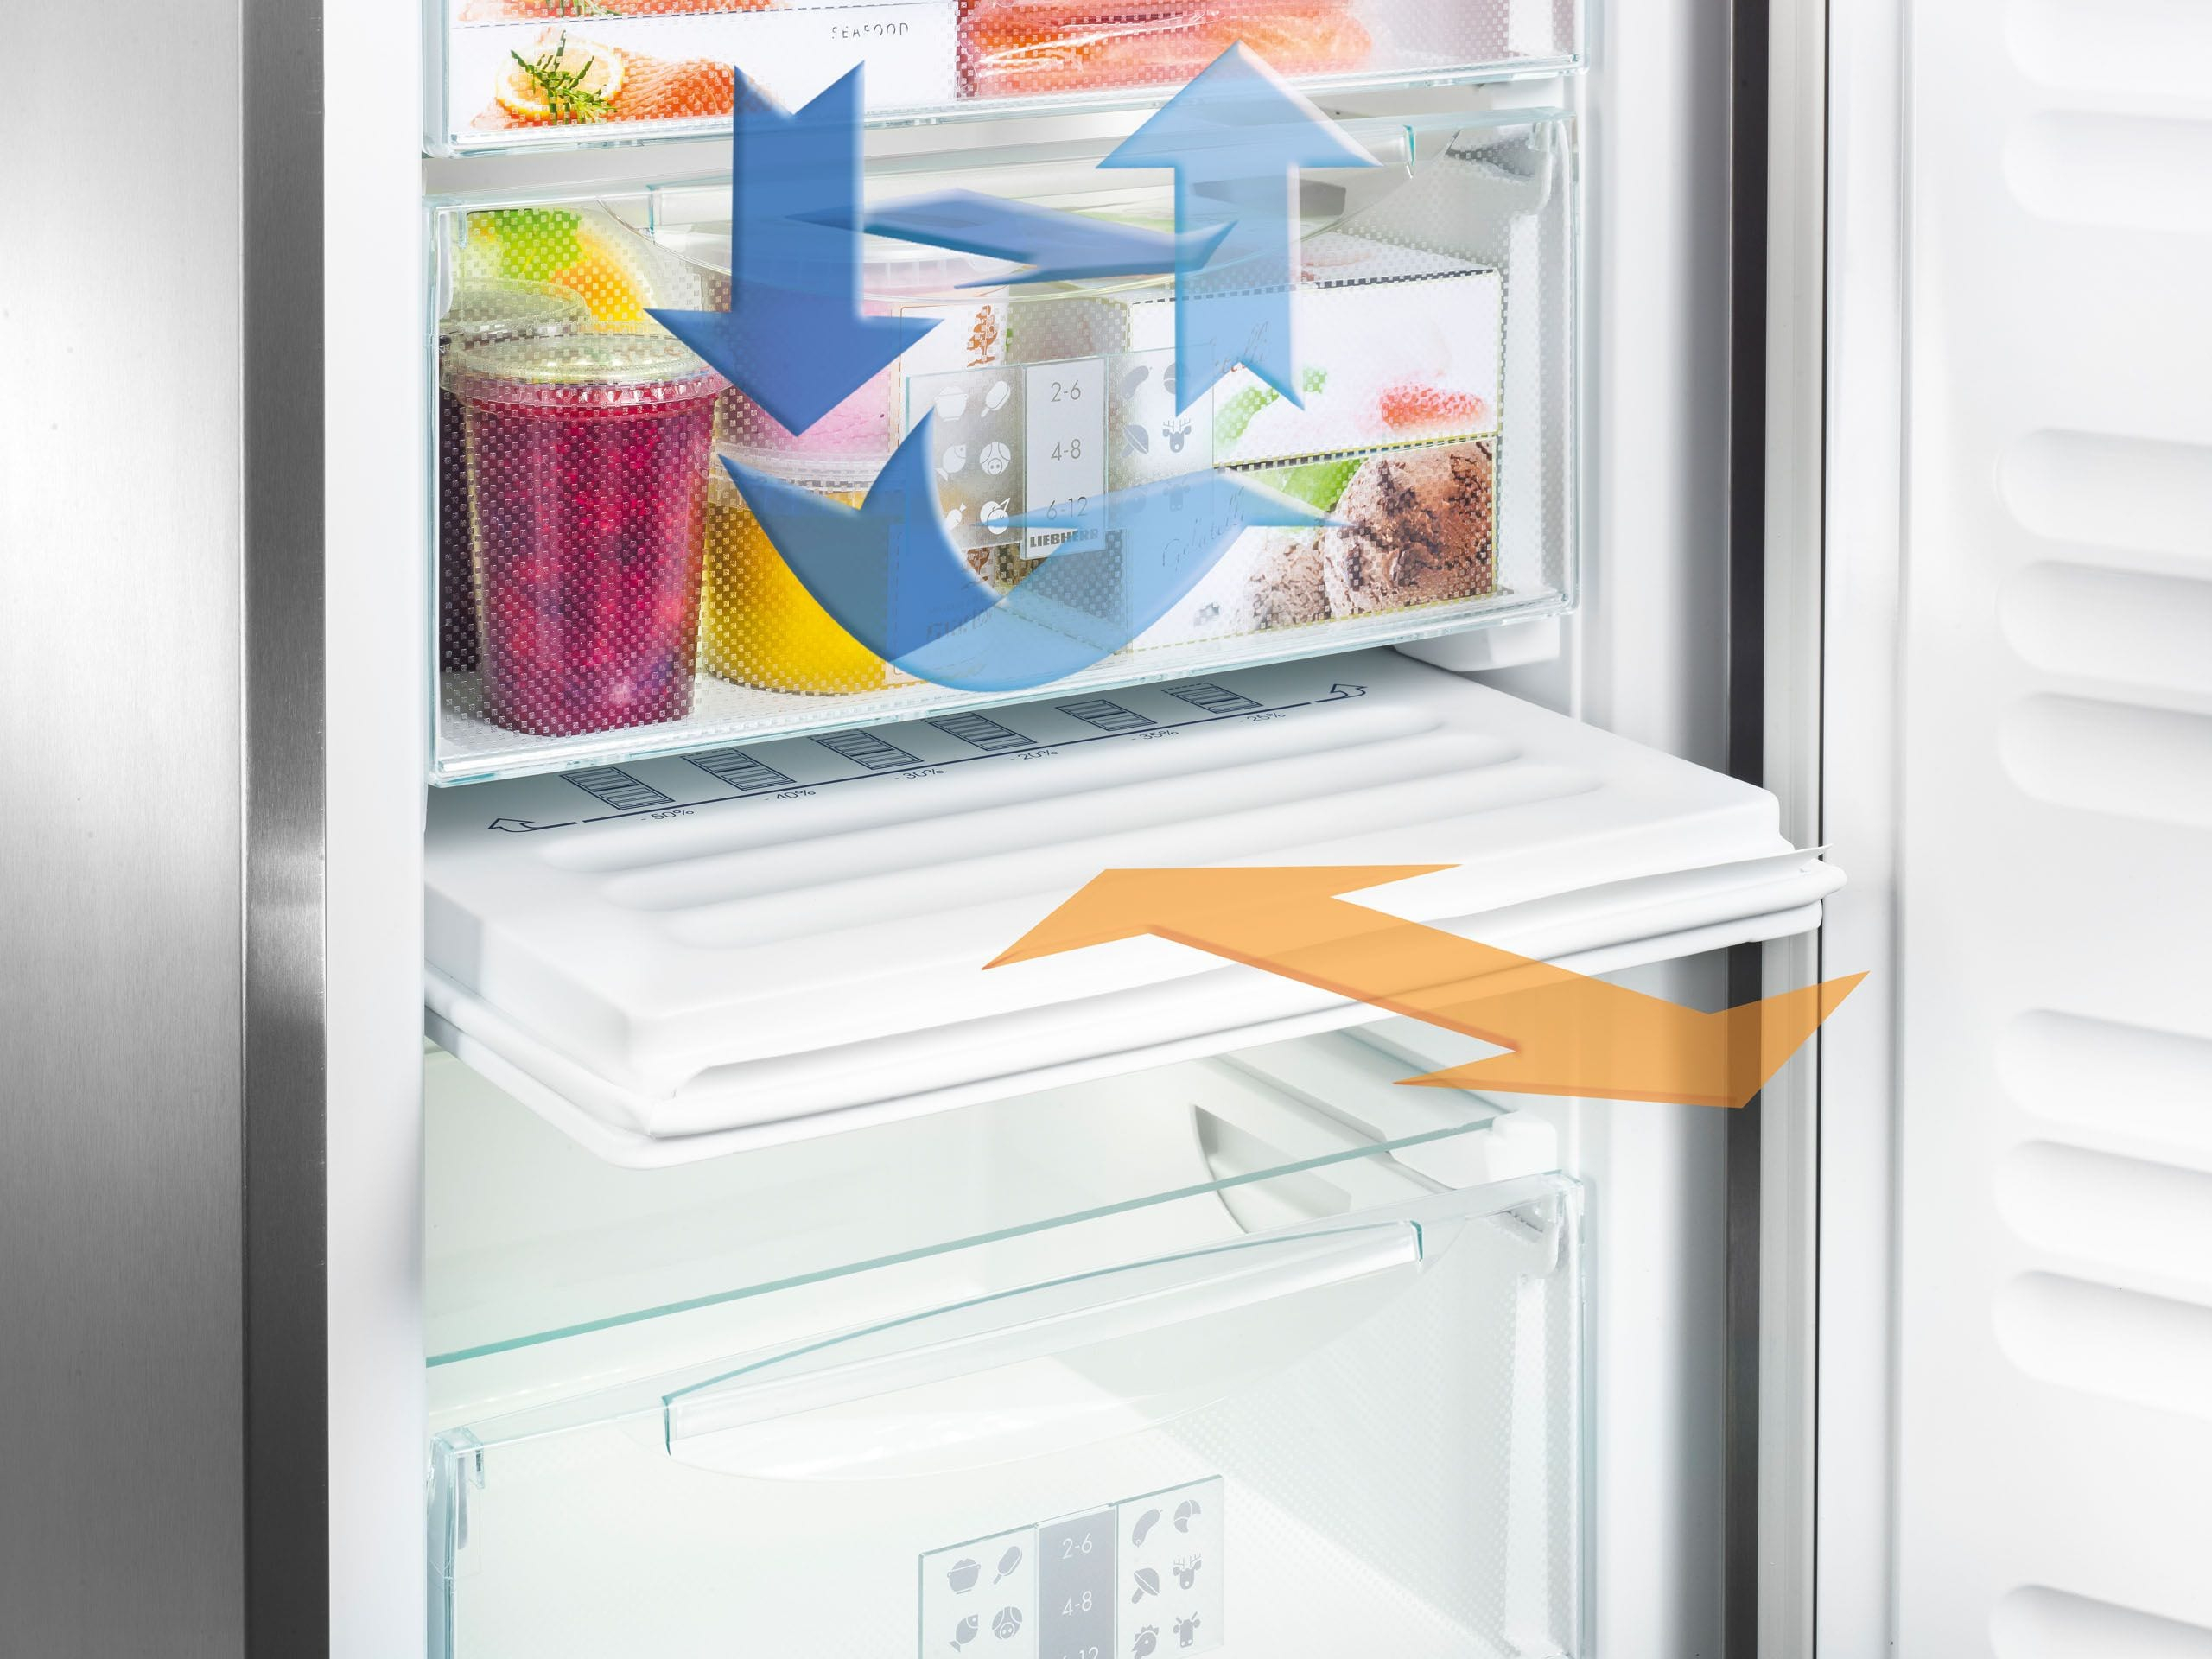 No More Defrosting With Liebherr Nofrost Technology Freshmag intended for size 2560 X 1920